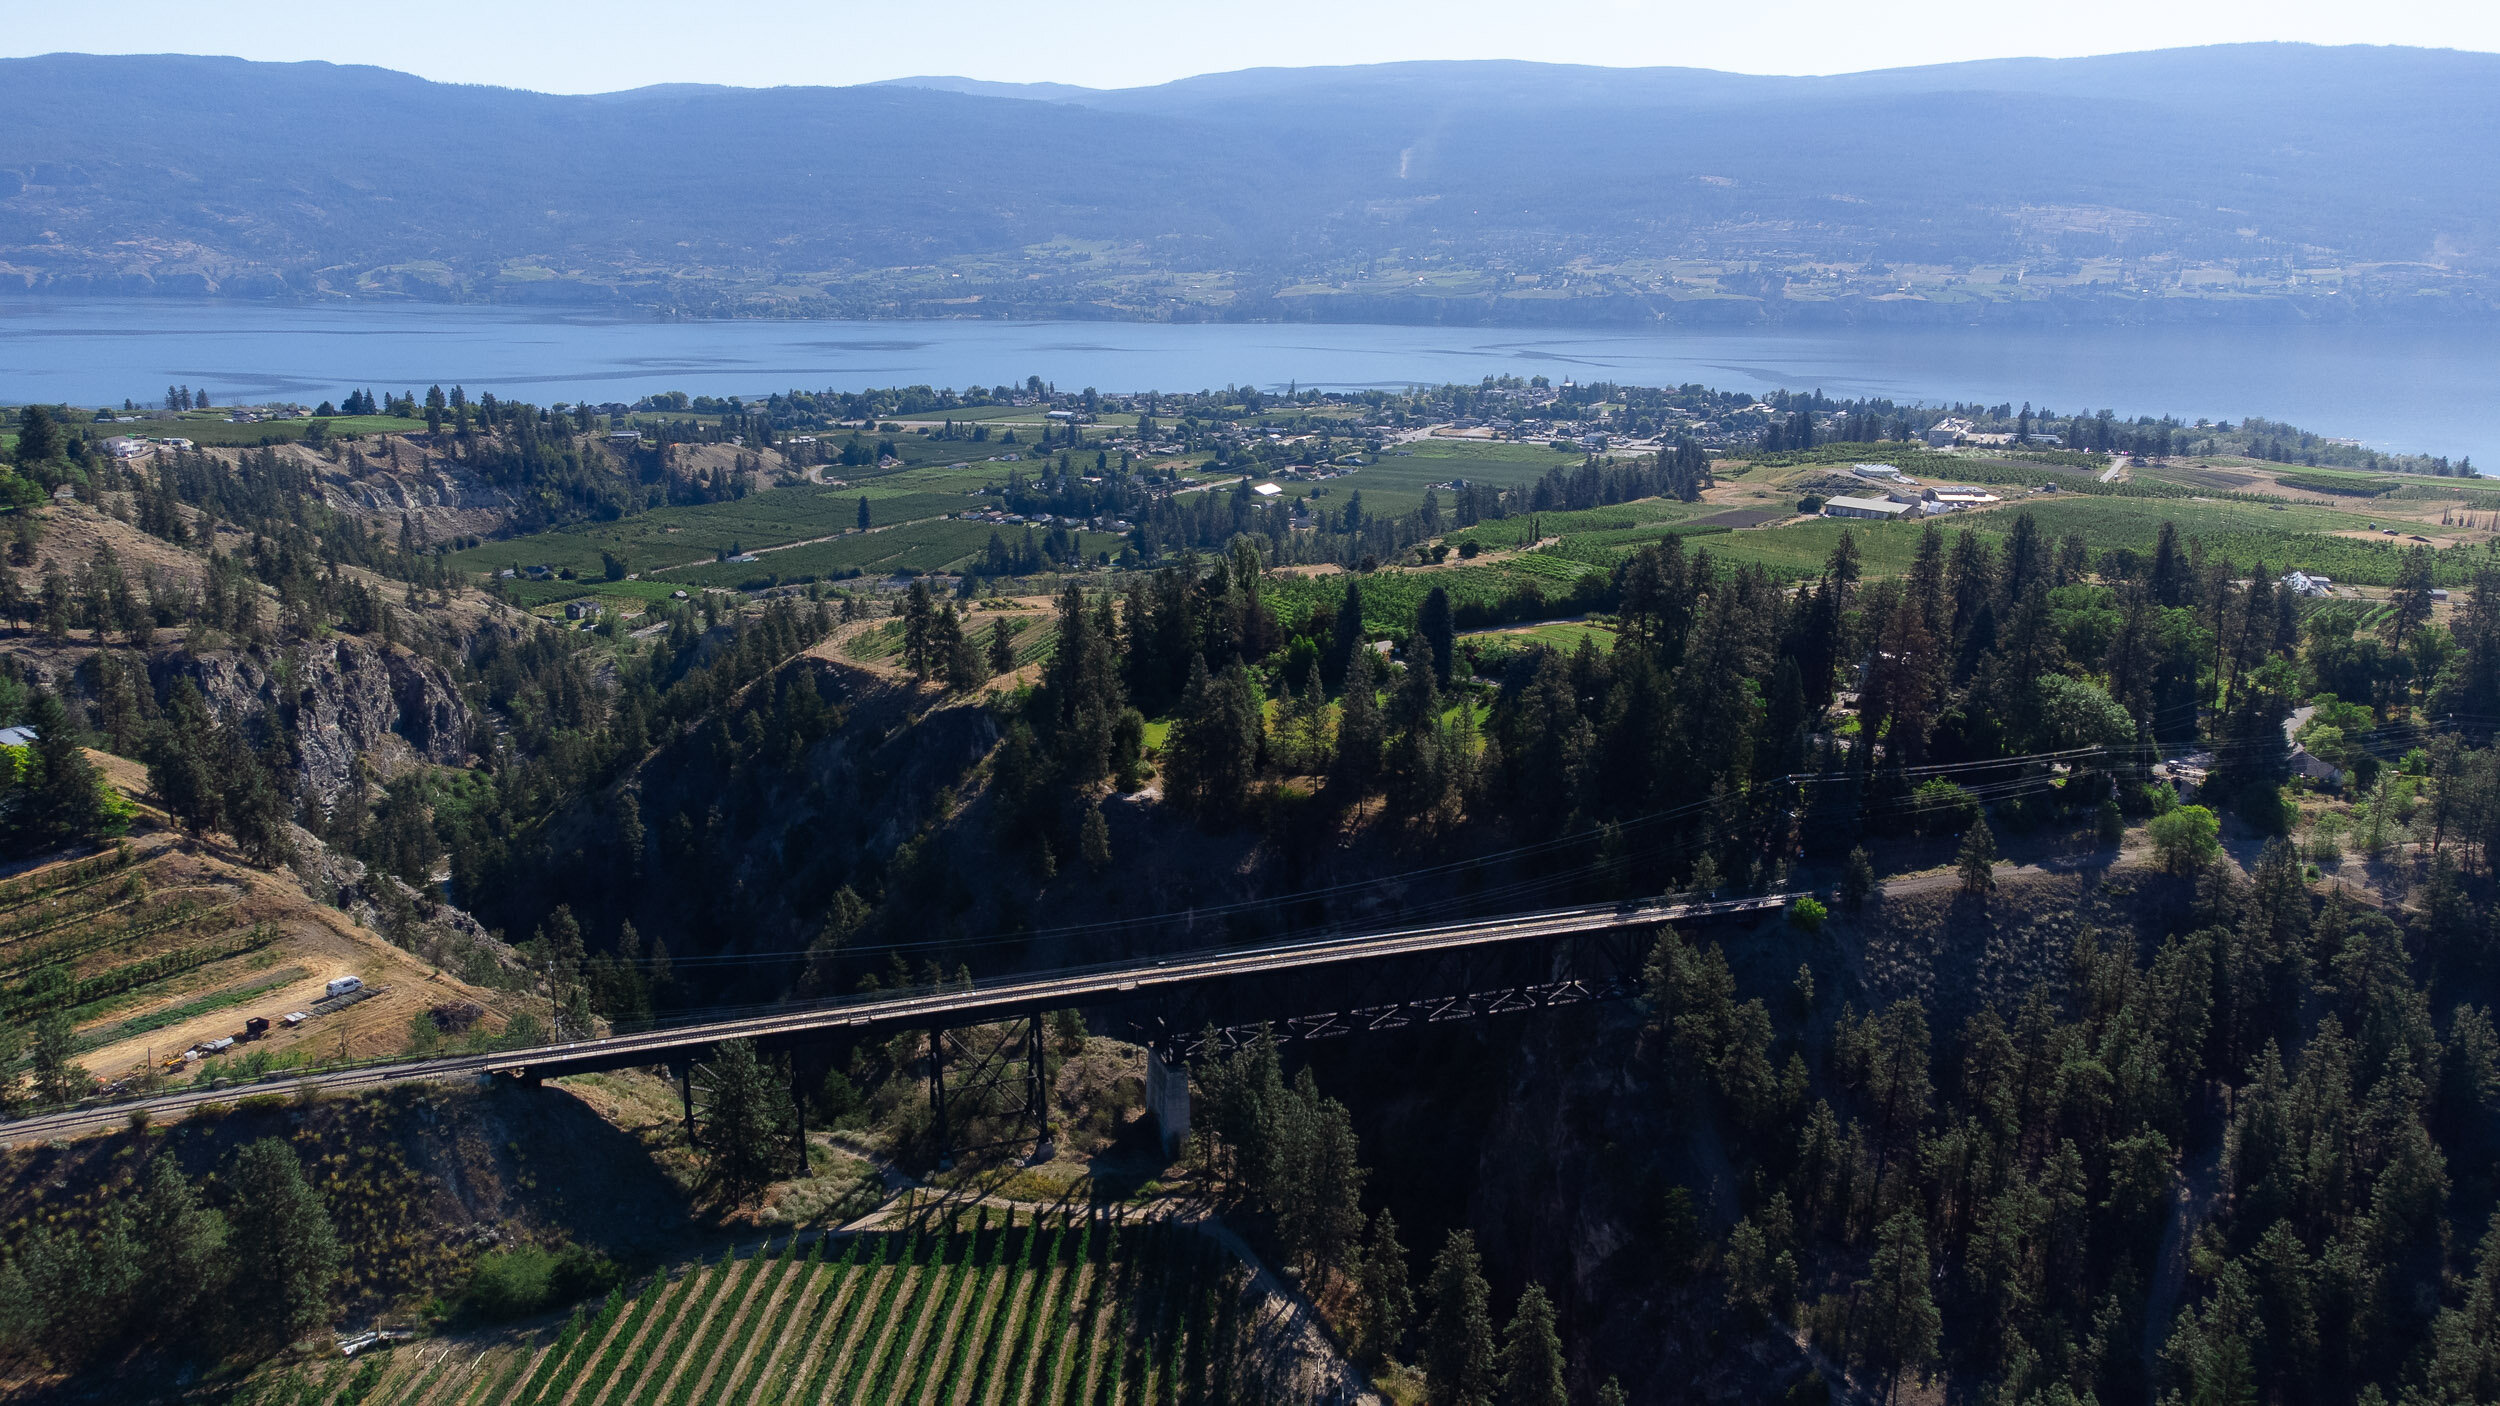  As we approached Penticton we crossed over the Trout Creek Trestle. Built between 1910 and 1915, the section of the KVR in Summerland between Trout Creek and Bathville Road is the only preserved section of the railway that is still used to this day.